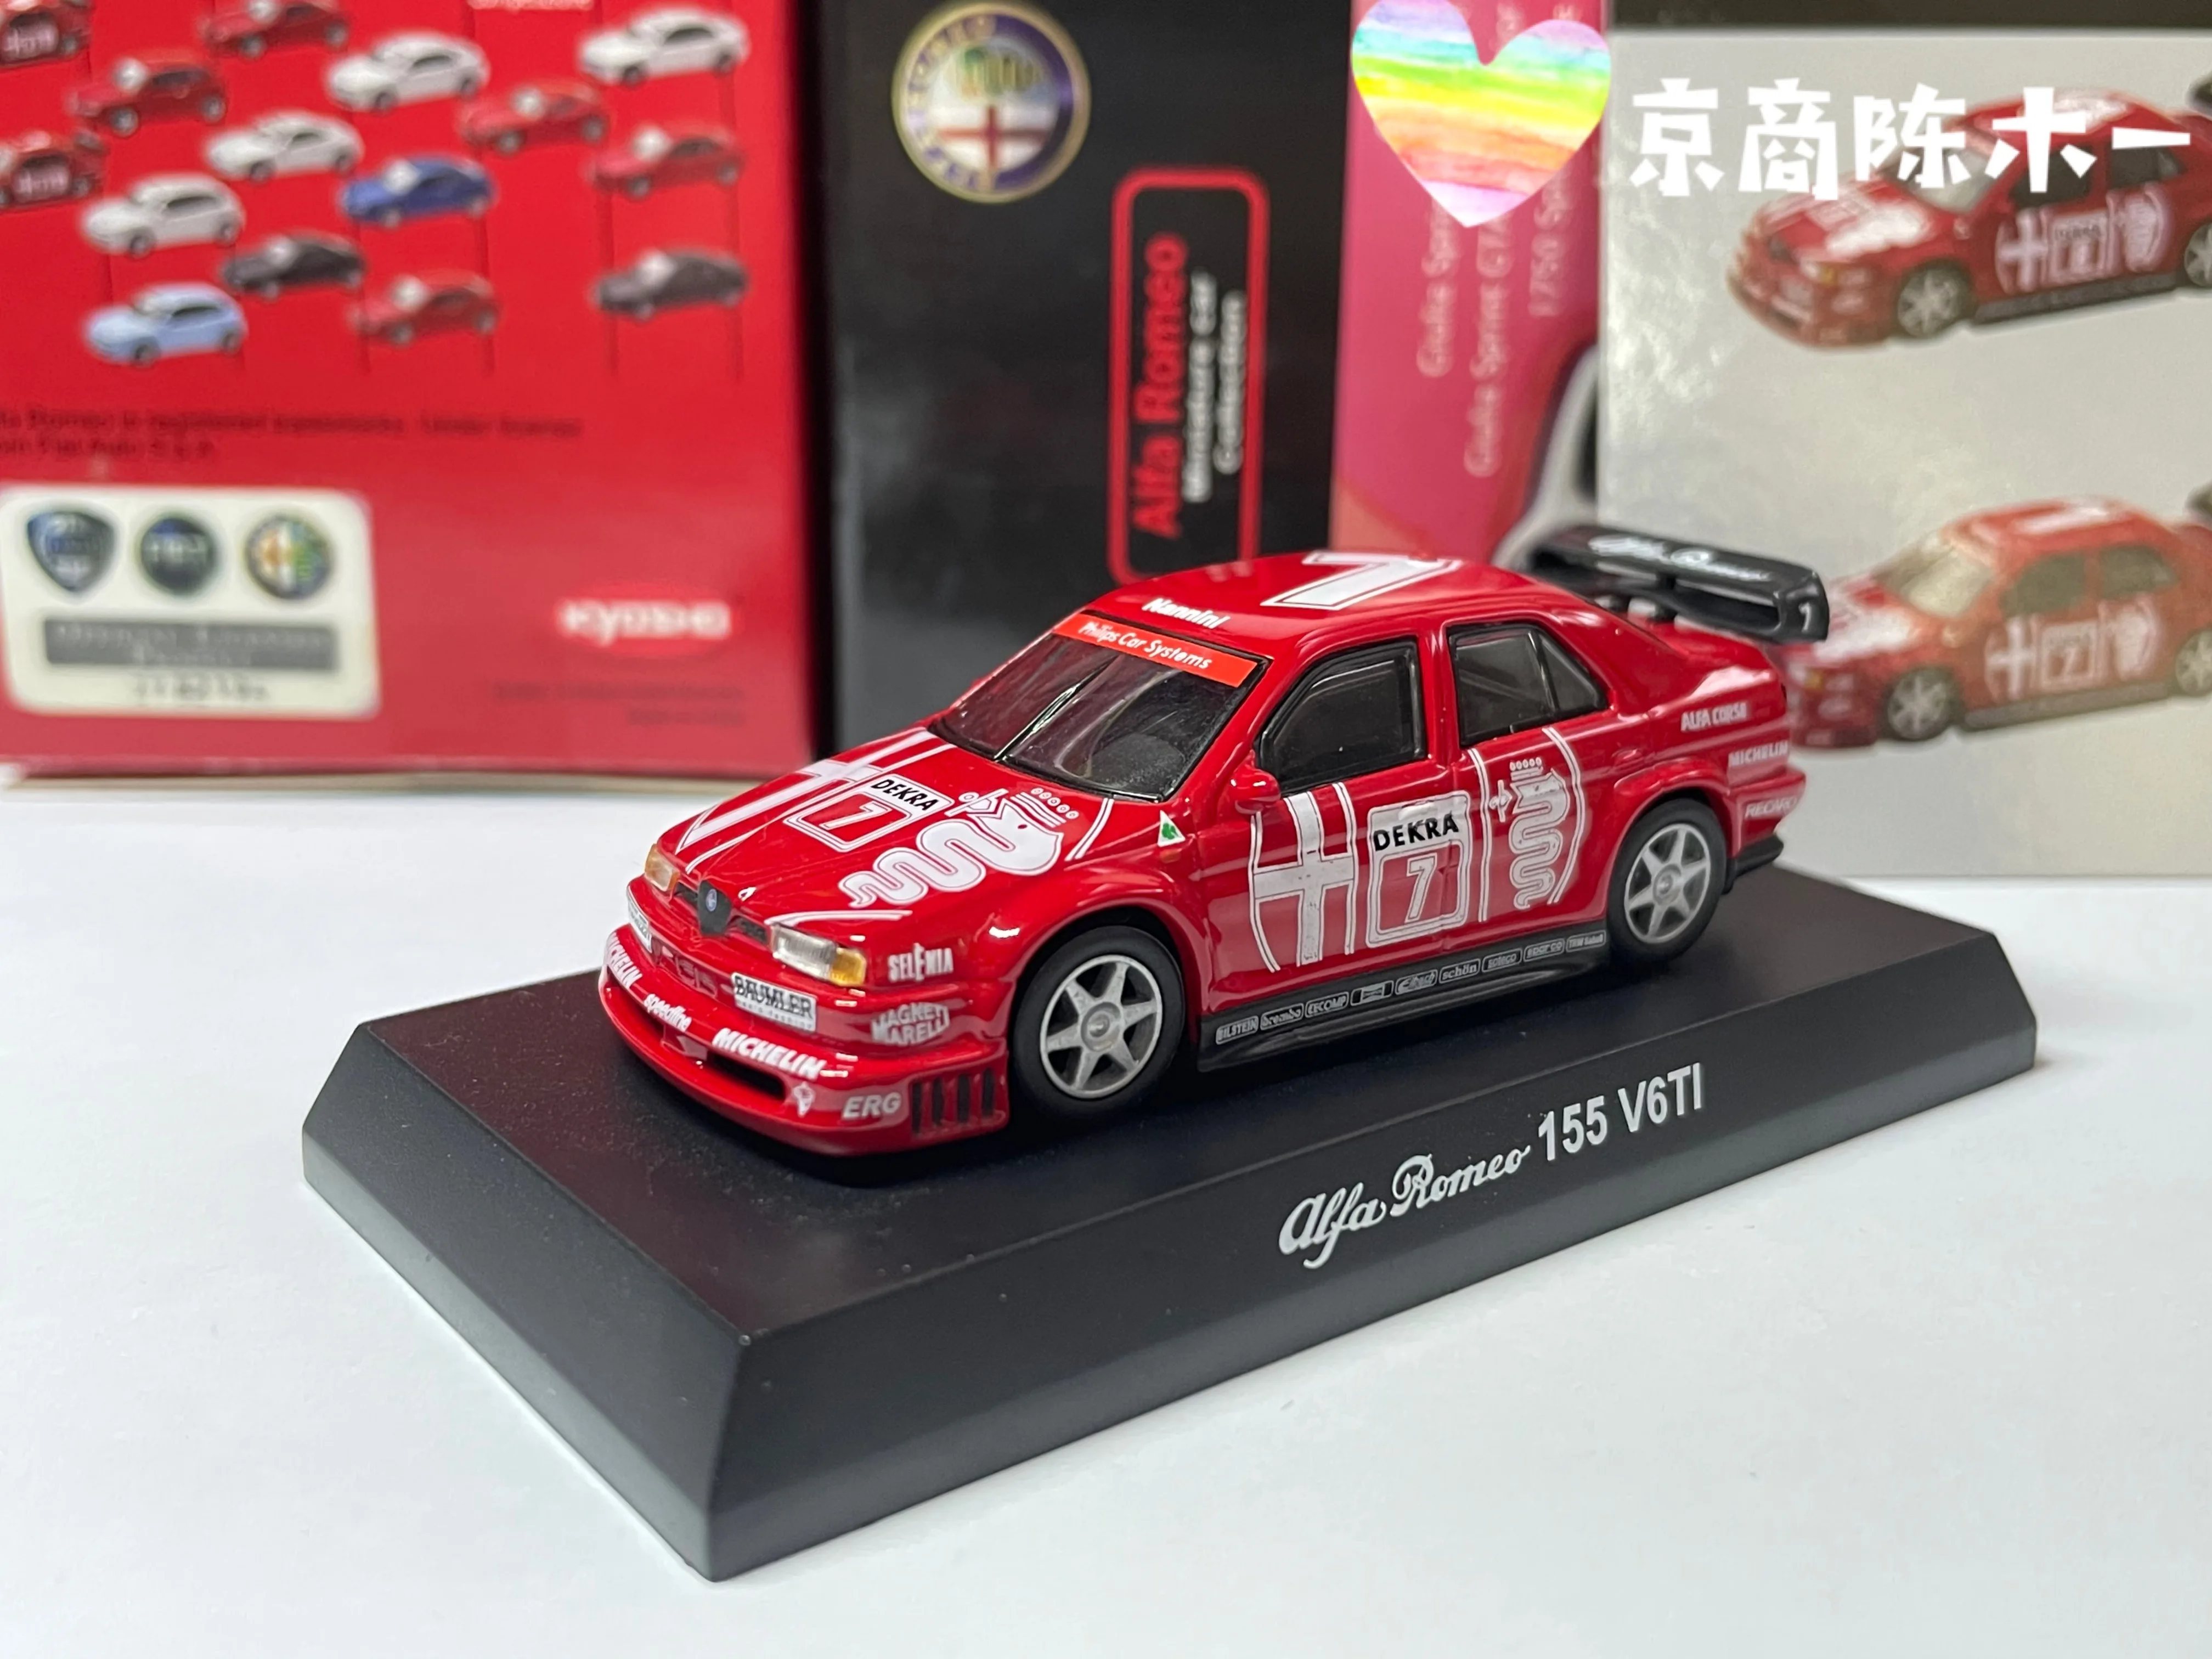 1-64-kyosho-alfa-romeo-155-v6-ti-7-dtm-lm-f1-racing-collection-of-die-cast-alloy-car-decoration-model-toys